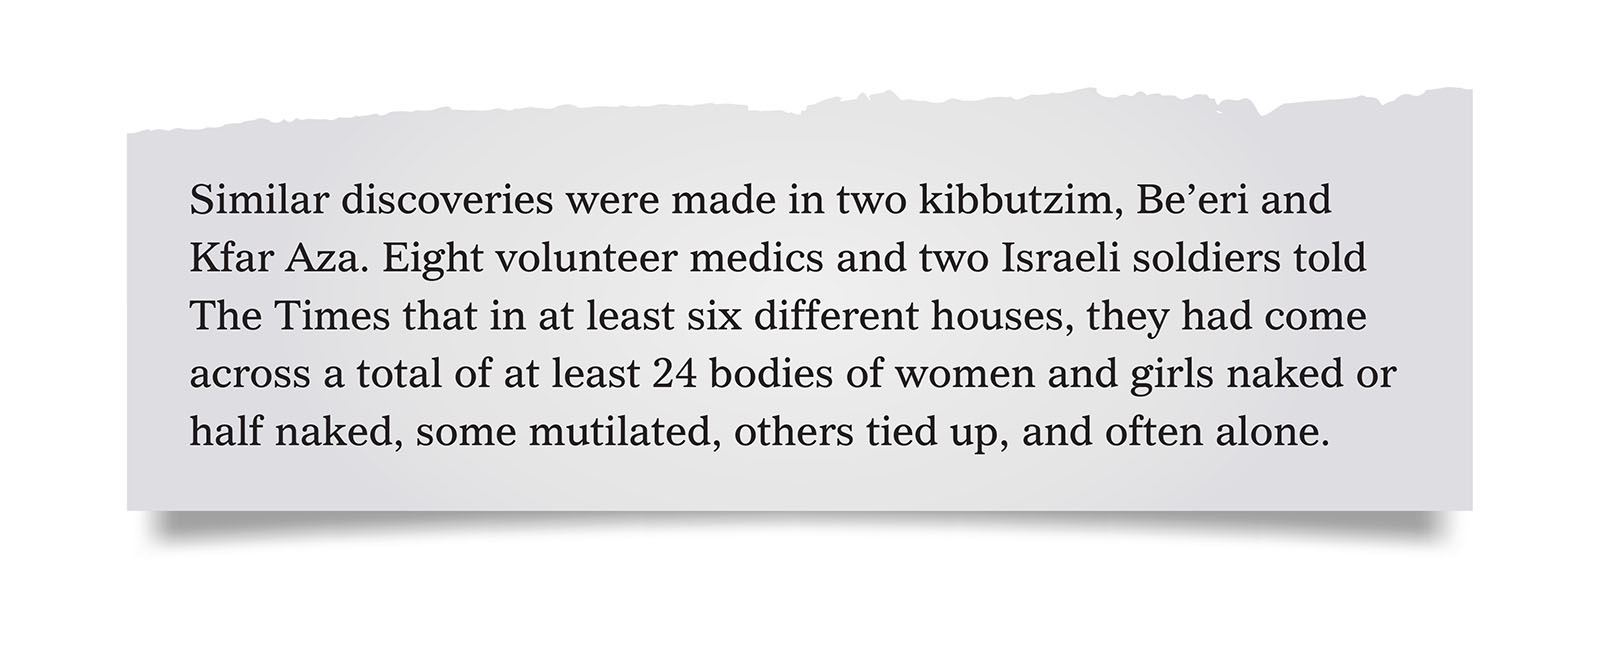 Pull quote:
Similar discoveries were made in two kibbutzim, Be’eri and Kfar Aza. Eight volunteer medics and two Israeli soldiers told The Times that in at least six different houses, they had come across a total of at least 24 bodies of women and girls naked or half naked, some mutilated, others tied up, and often alone.